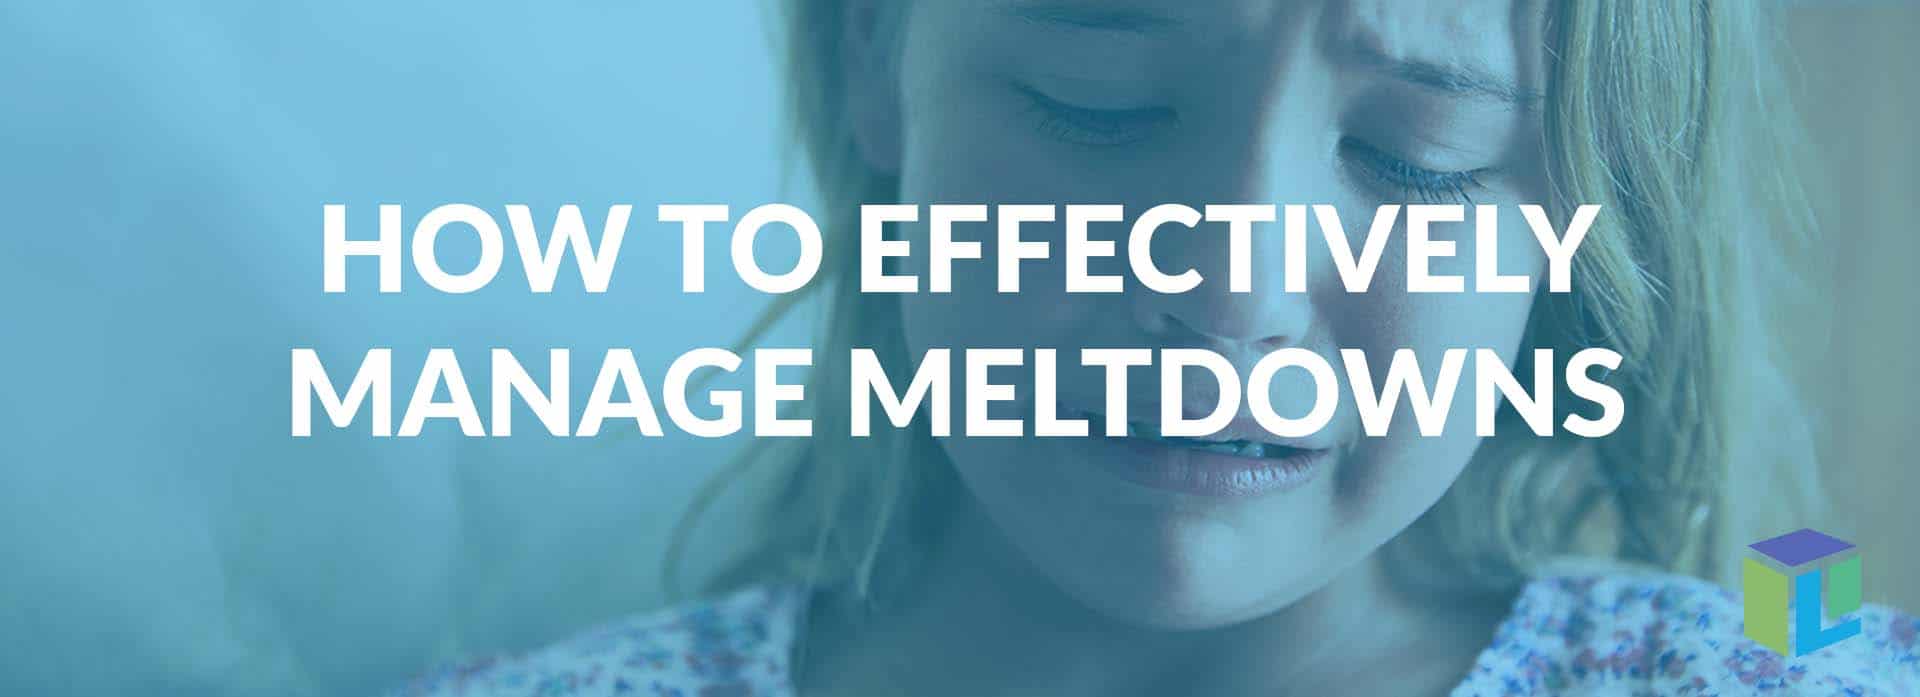 How To Effectively Manage Meltdowns